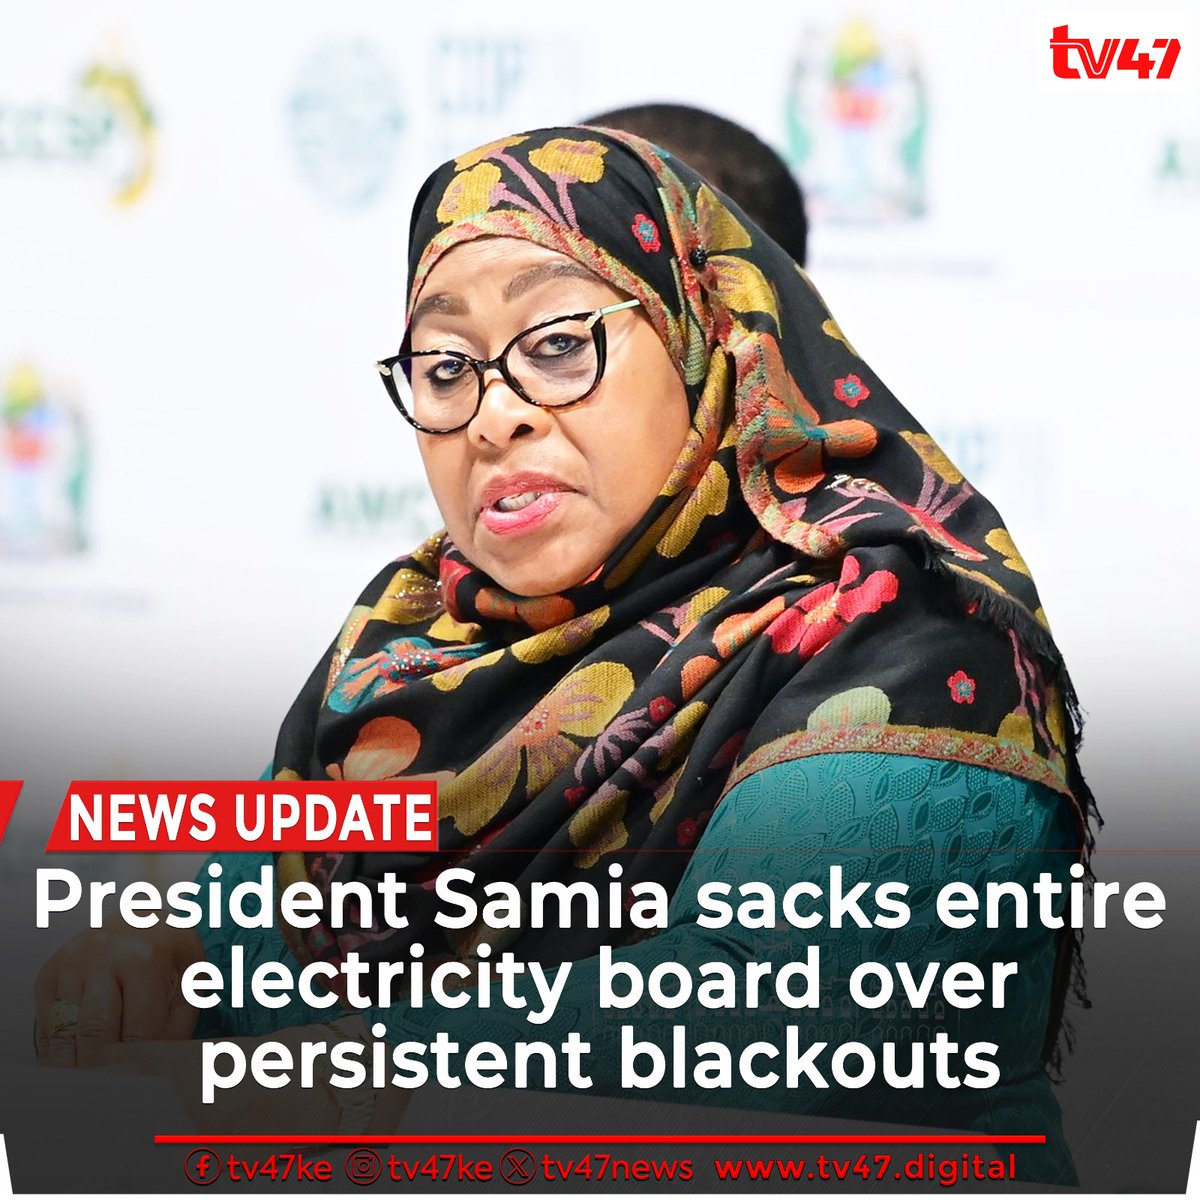 Tanzanian President Samia Suluhu today sacked the entire electricity board over persistent blackouts in Tanzania. This is what President William Ruto should do in Kenya without thinking twice.